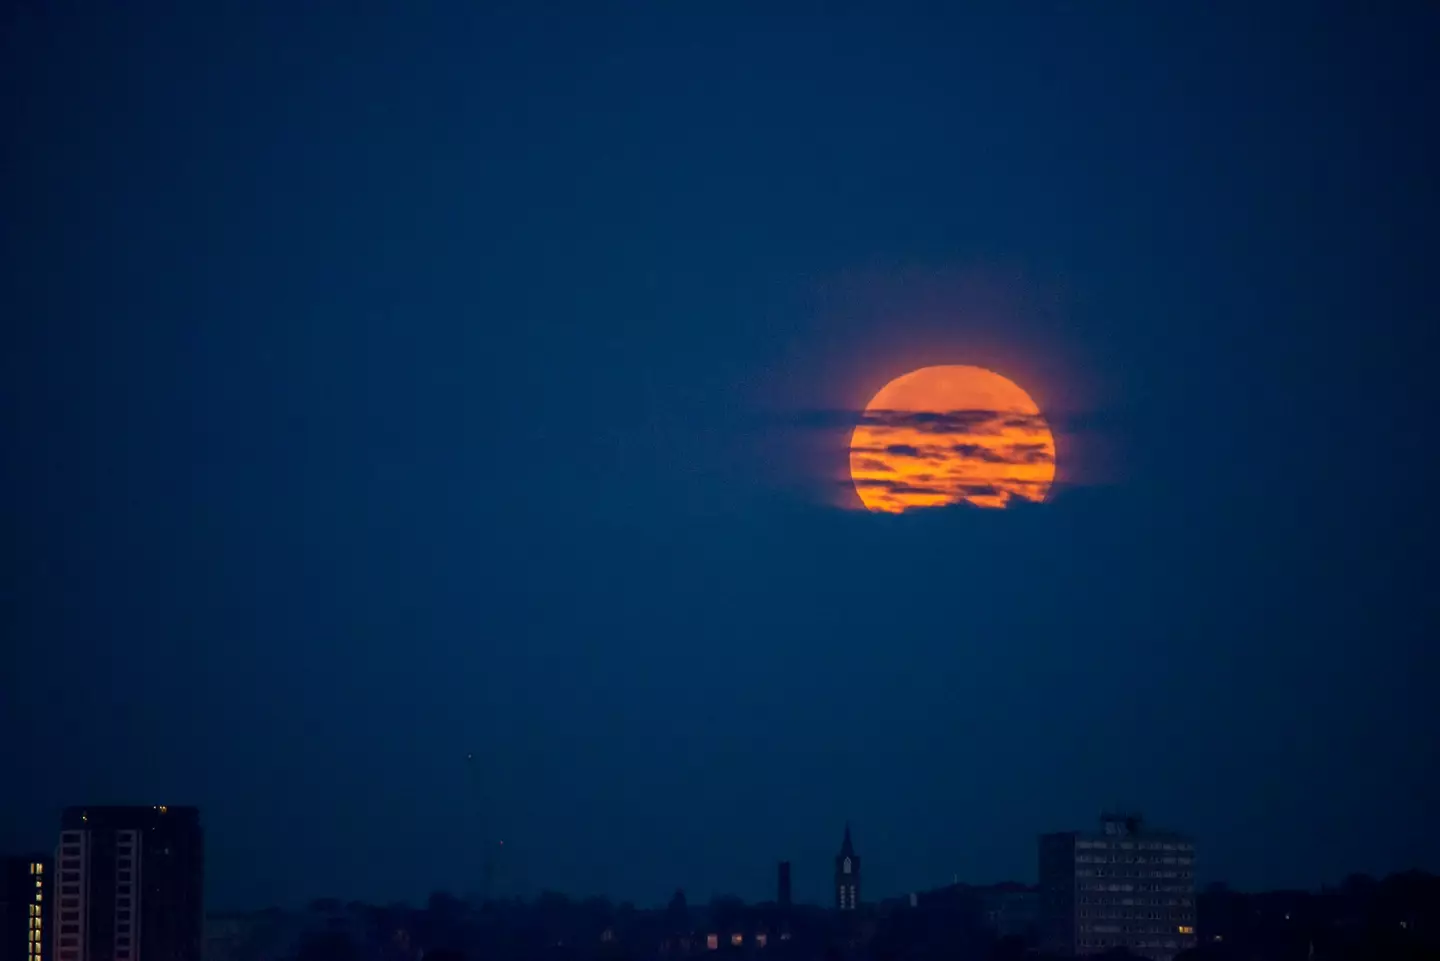 Tonight's full Flower Moon may have a slight orange hue to it. (Ray Wise / Getty Images)